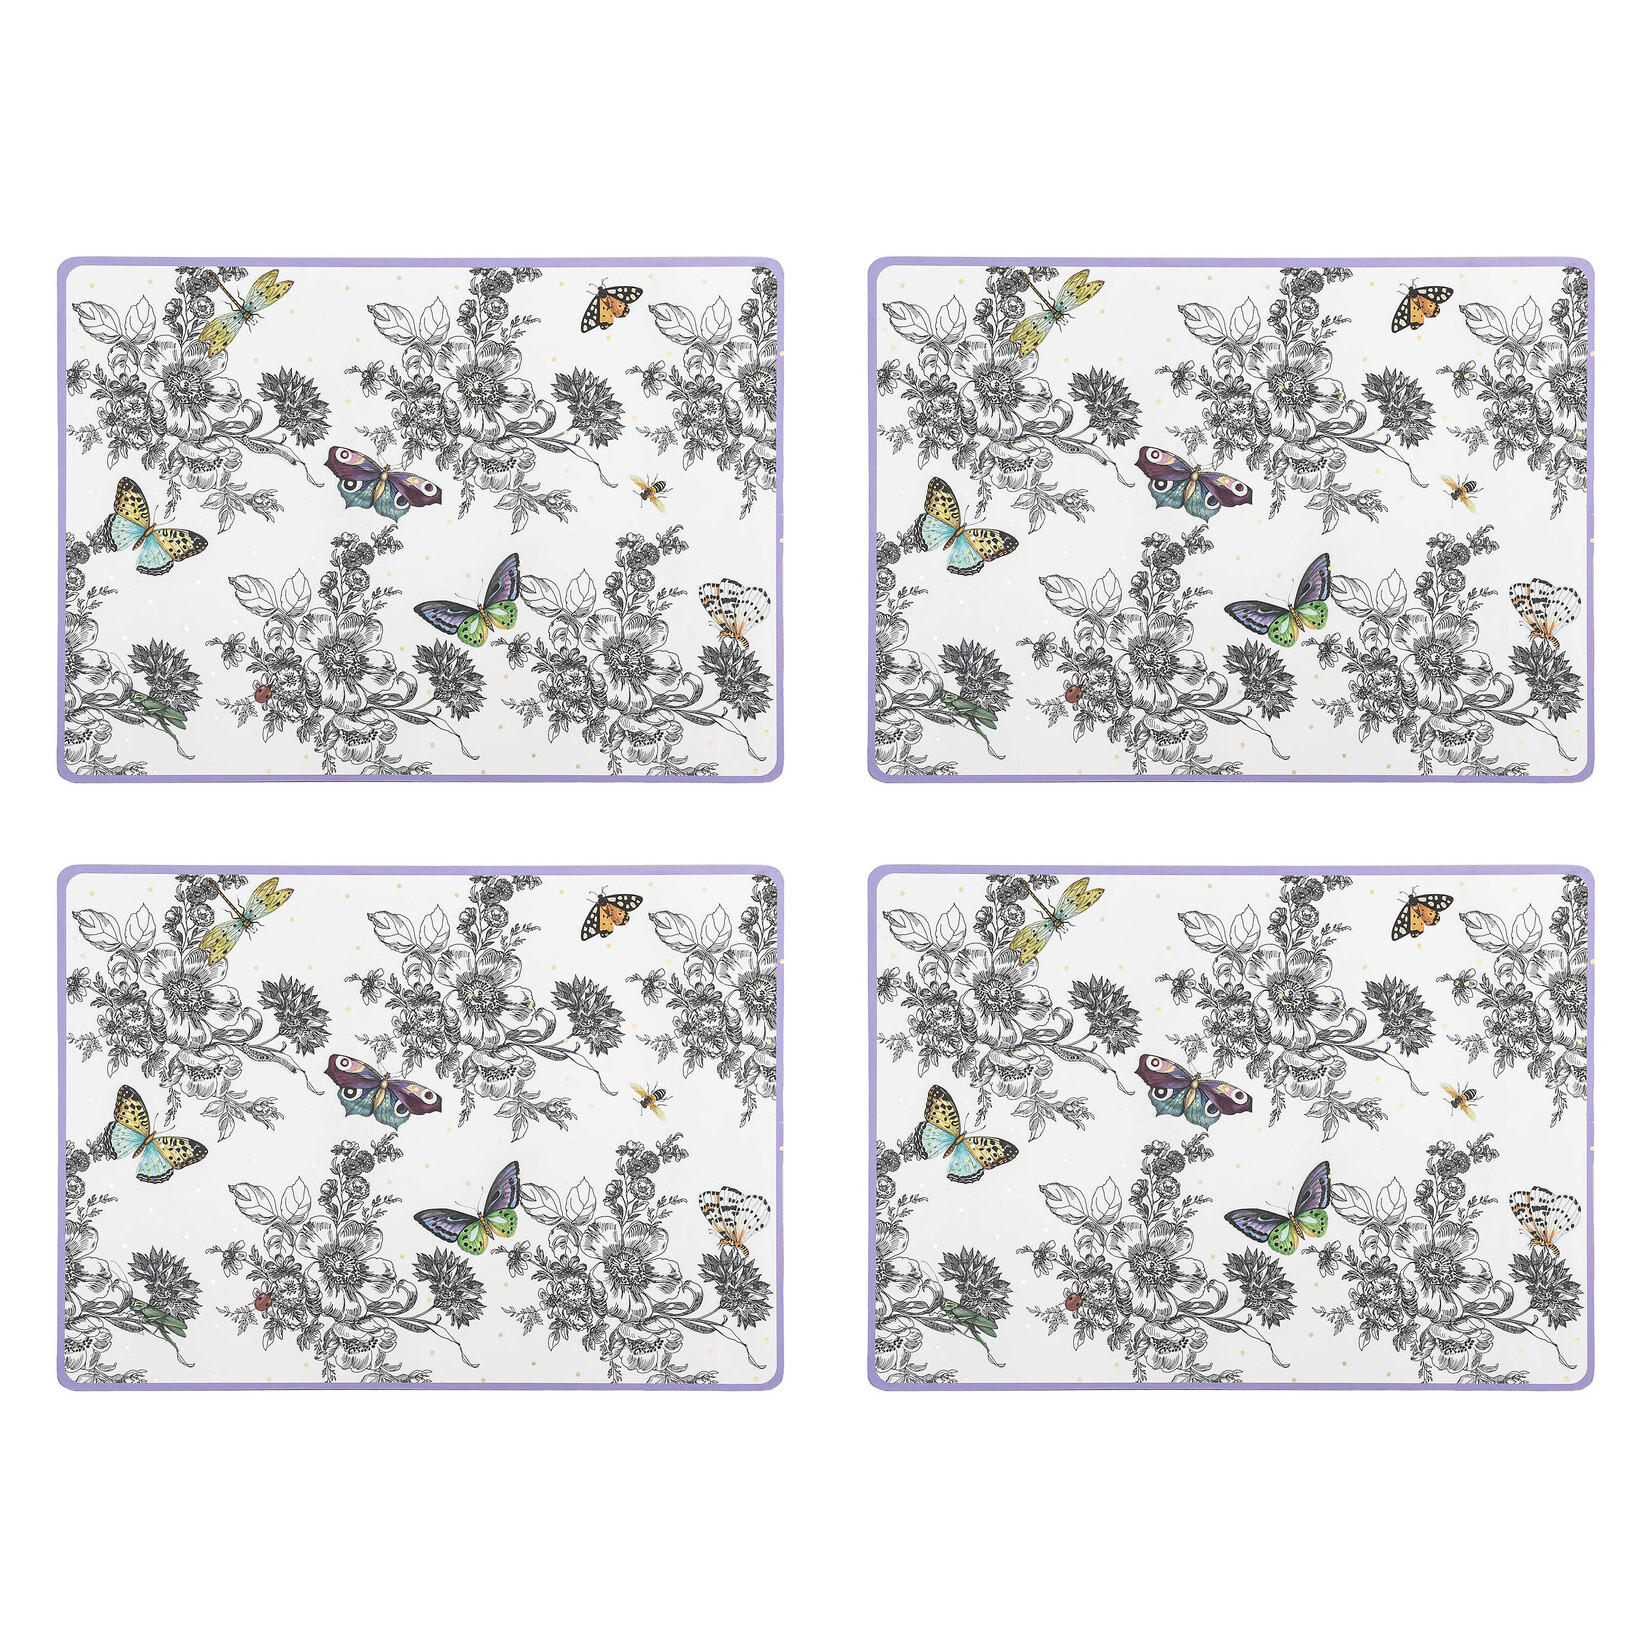 MacKenzie-Childs butterfly toile cork back placemats - set of 4